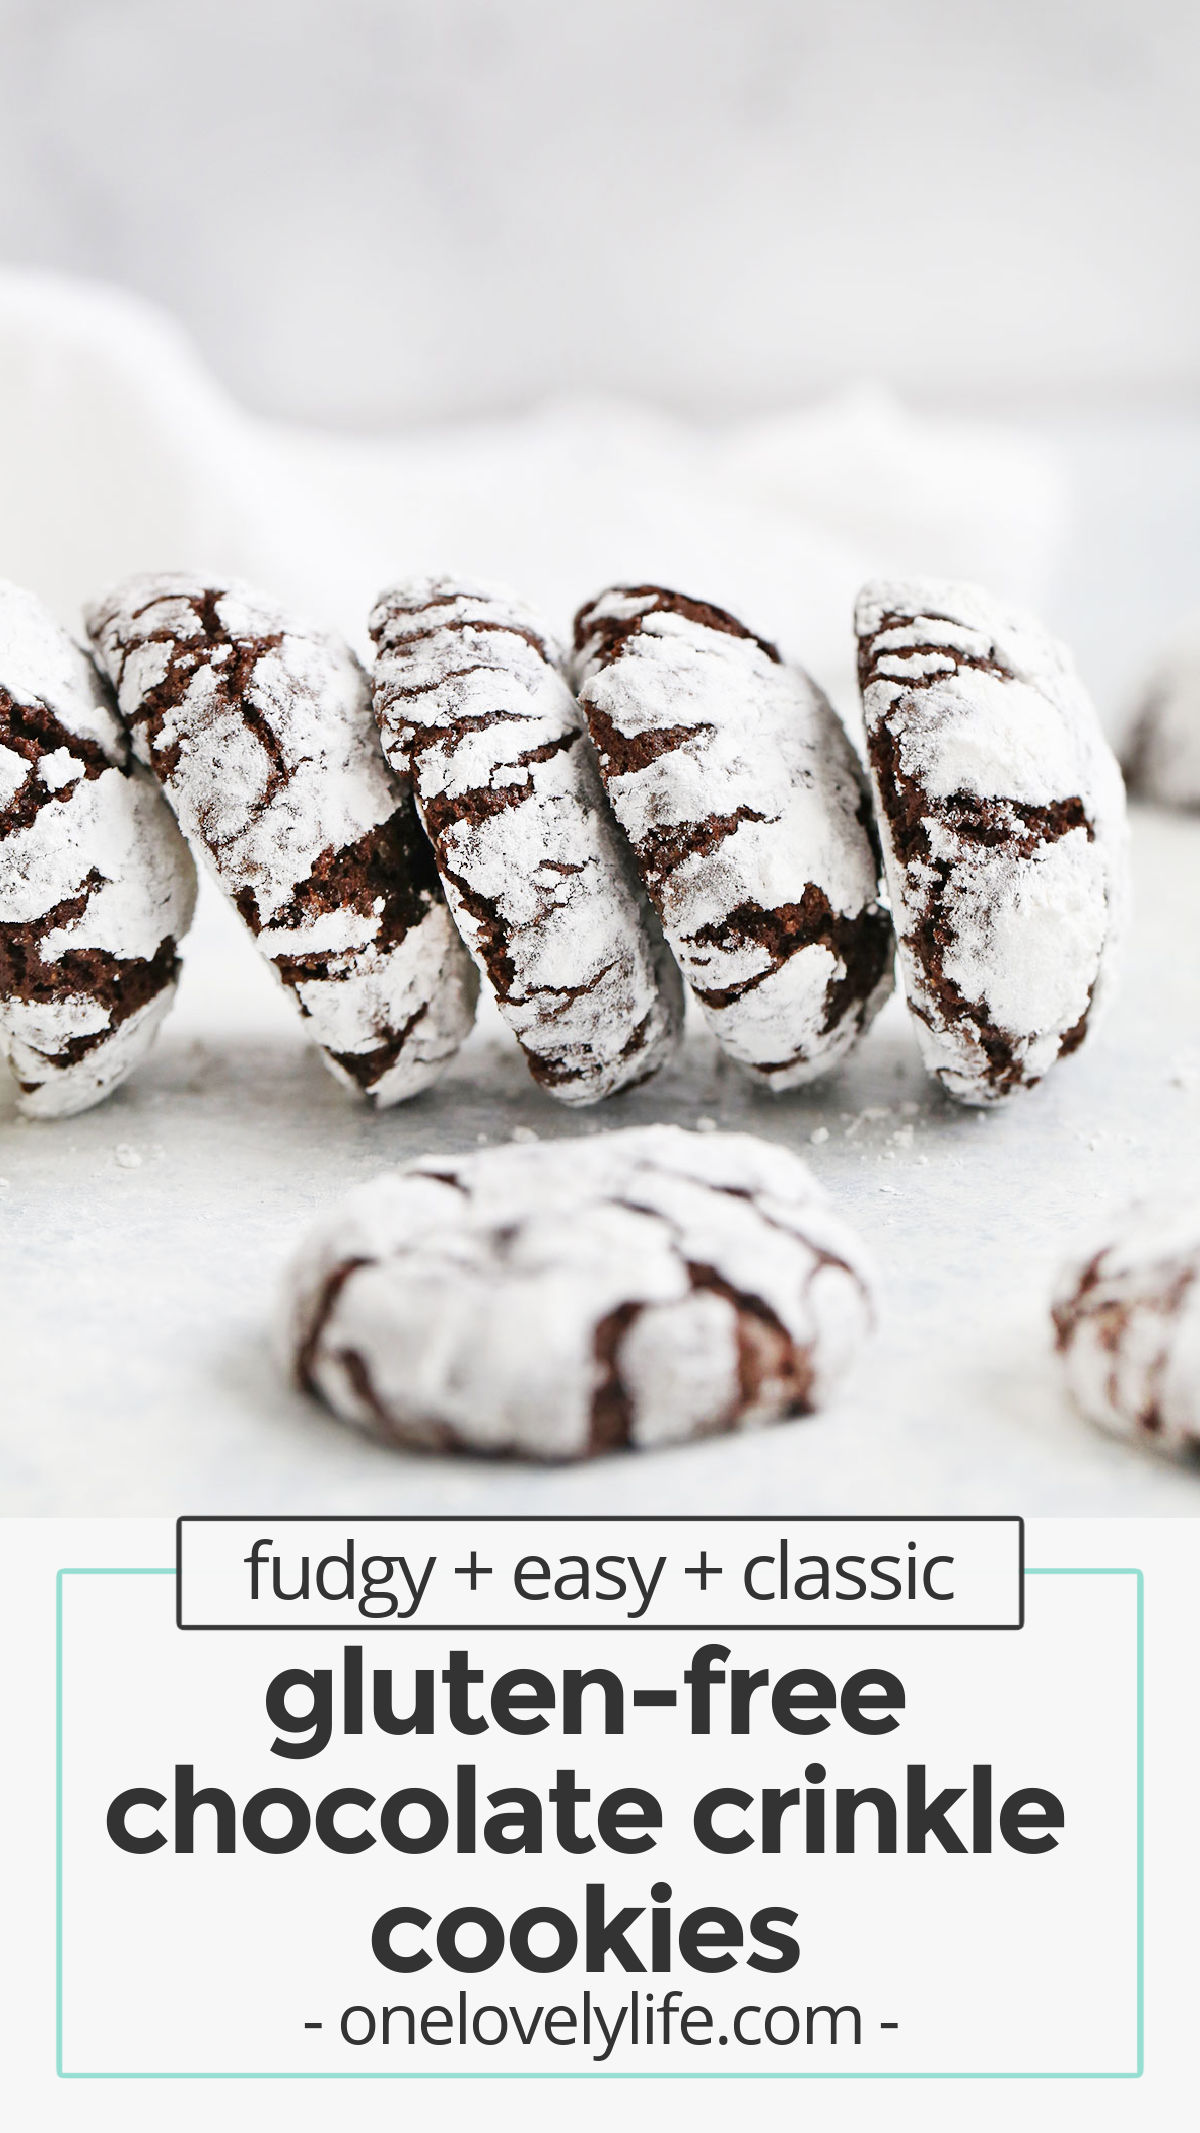 Gluten-Free Chocolate Crinkle Cookies - These gorgeous gluten-free crinkle cookies are ultra-fudgy and absolutely delicious! Perfect for the holidays or your next chocolate craving. (Gluten-Free & Dairy Free) // Crinkle Cookies Recipe // Chocolate Crinkle Cookies Recipe // Gluten Free Christmas Cookies // #cookies #chocolate #crinklecookies #christmascookies #chocolatecookies #glutenfree #dairyfree